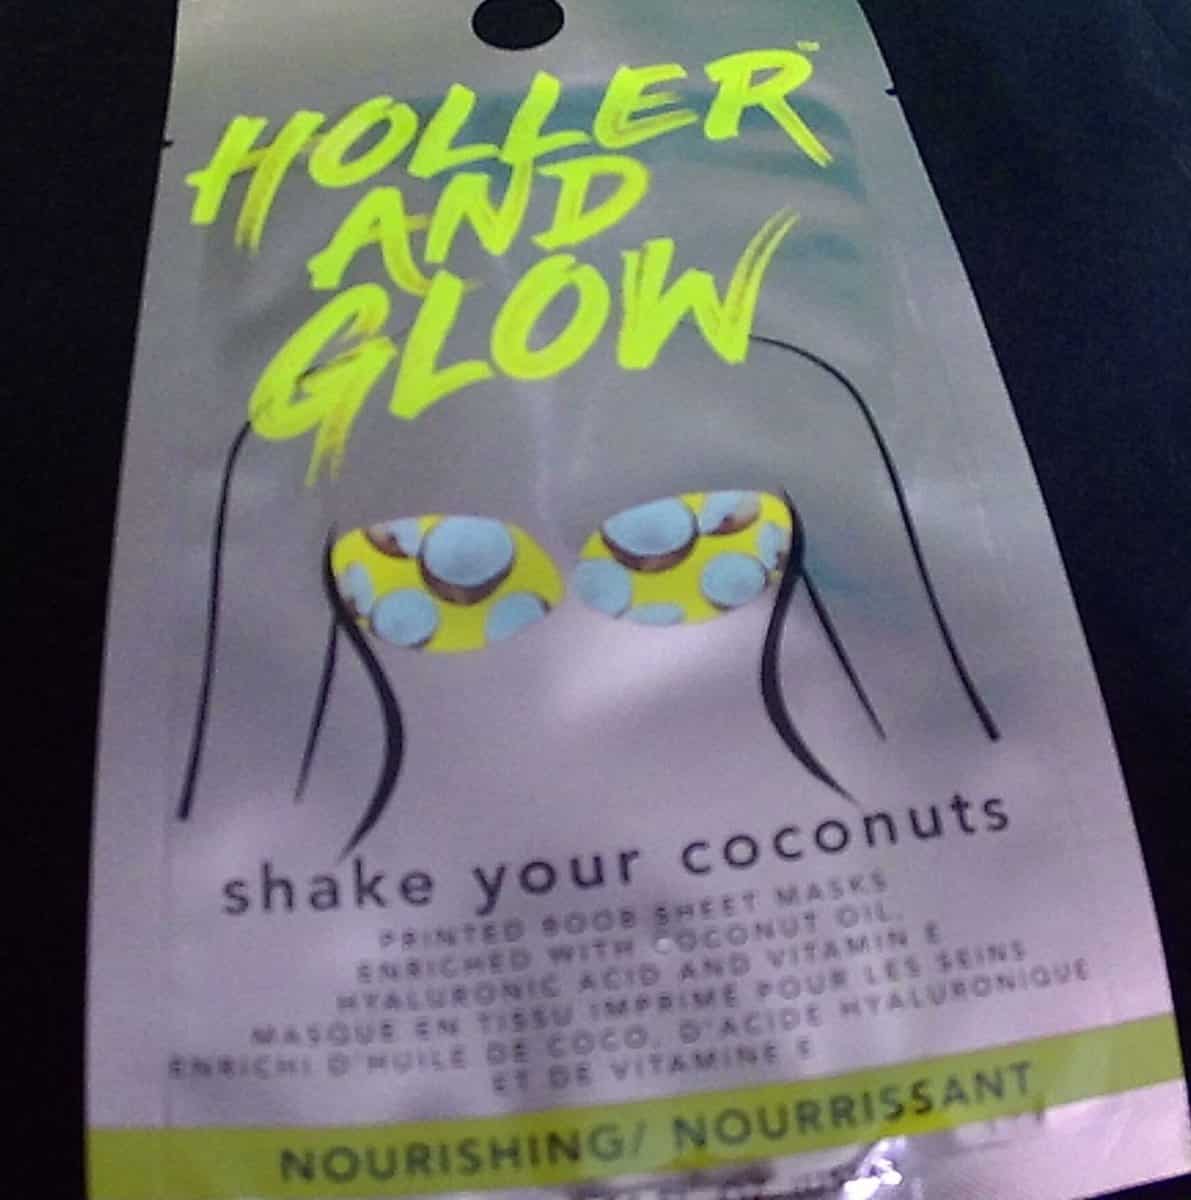 Holler and Glow Shake Your Coconuts Nourishing Printed Boob Sheet